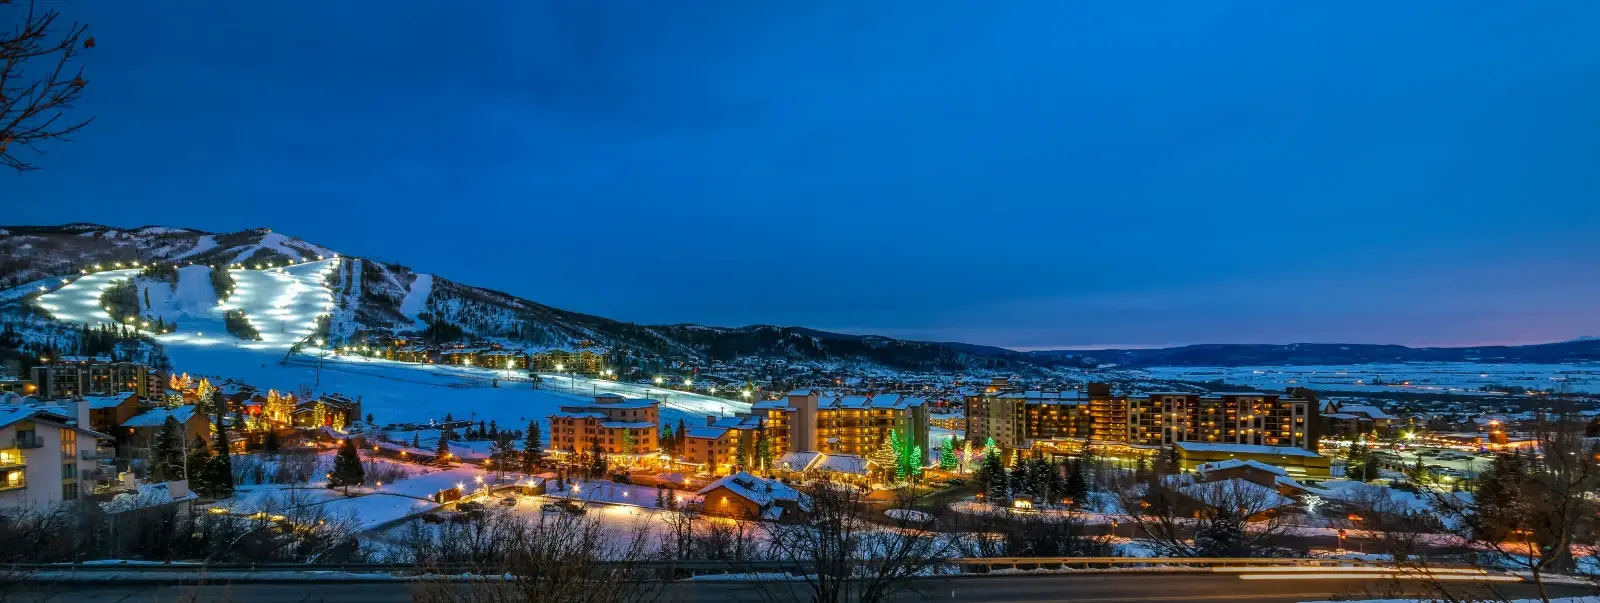 STEAMBOAT SPRINGS, CO